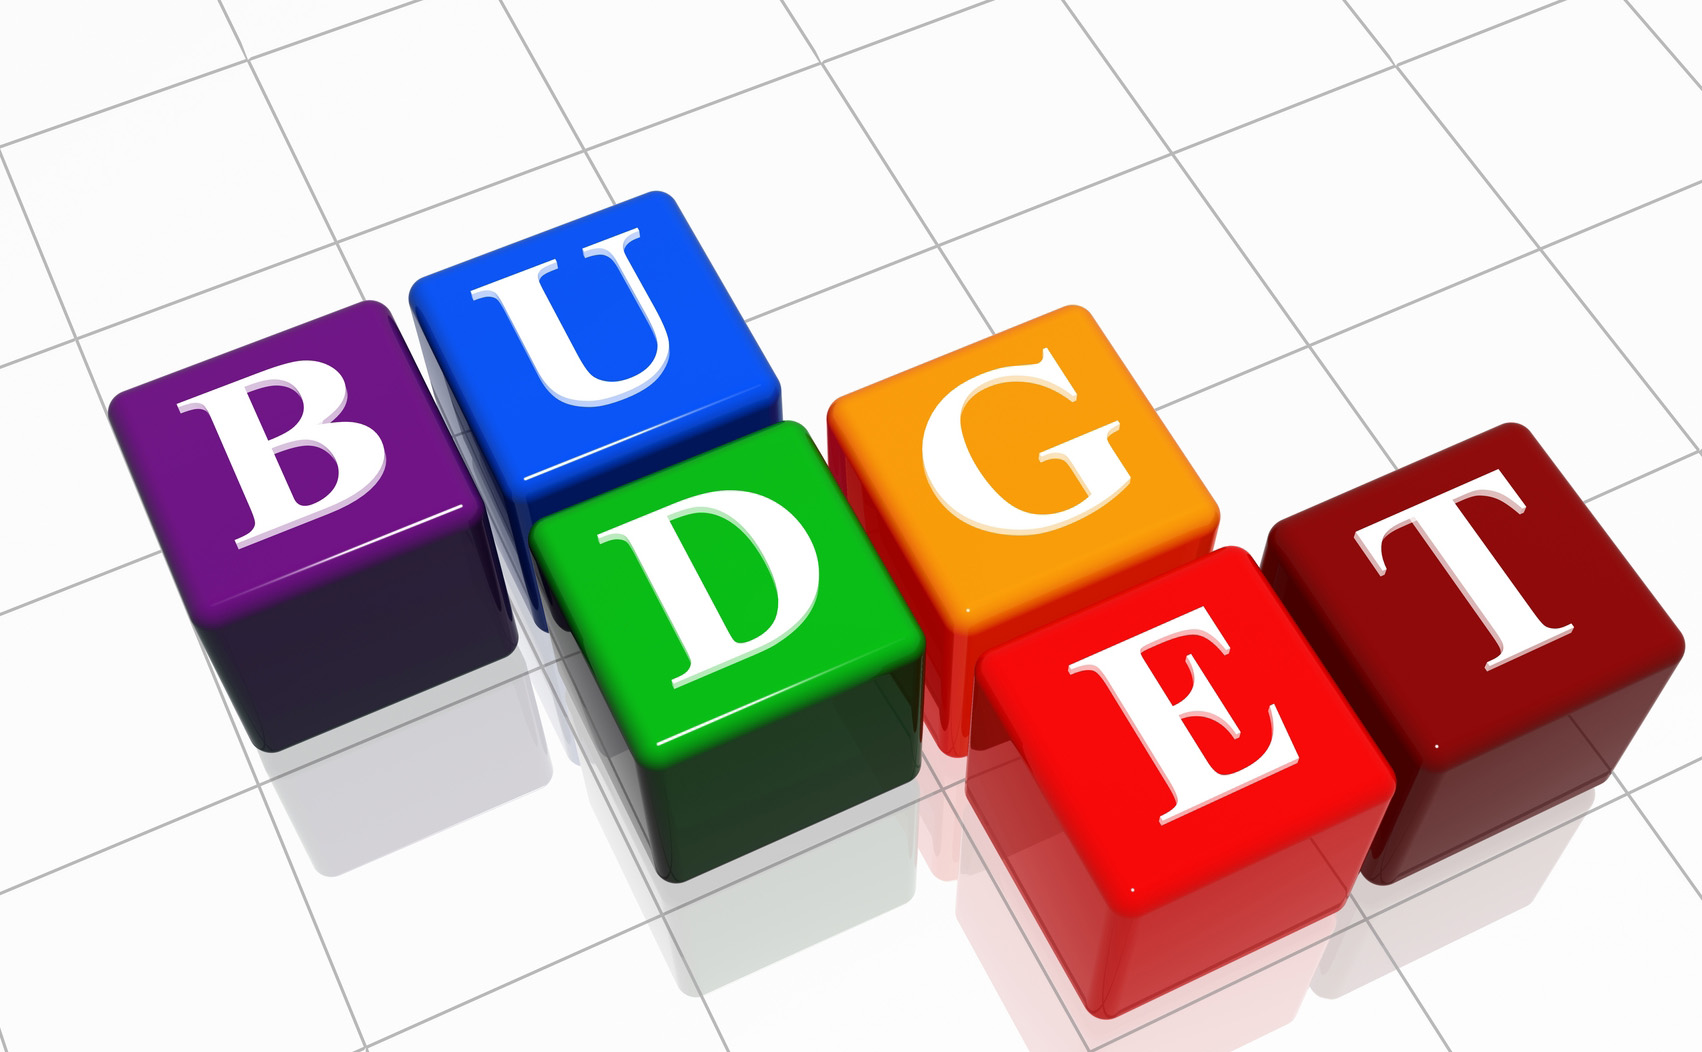 The Winners and Losers in Business – Australian Budget 2013